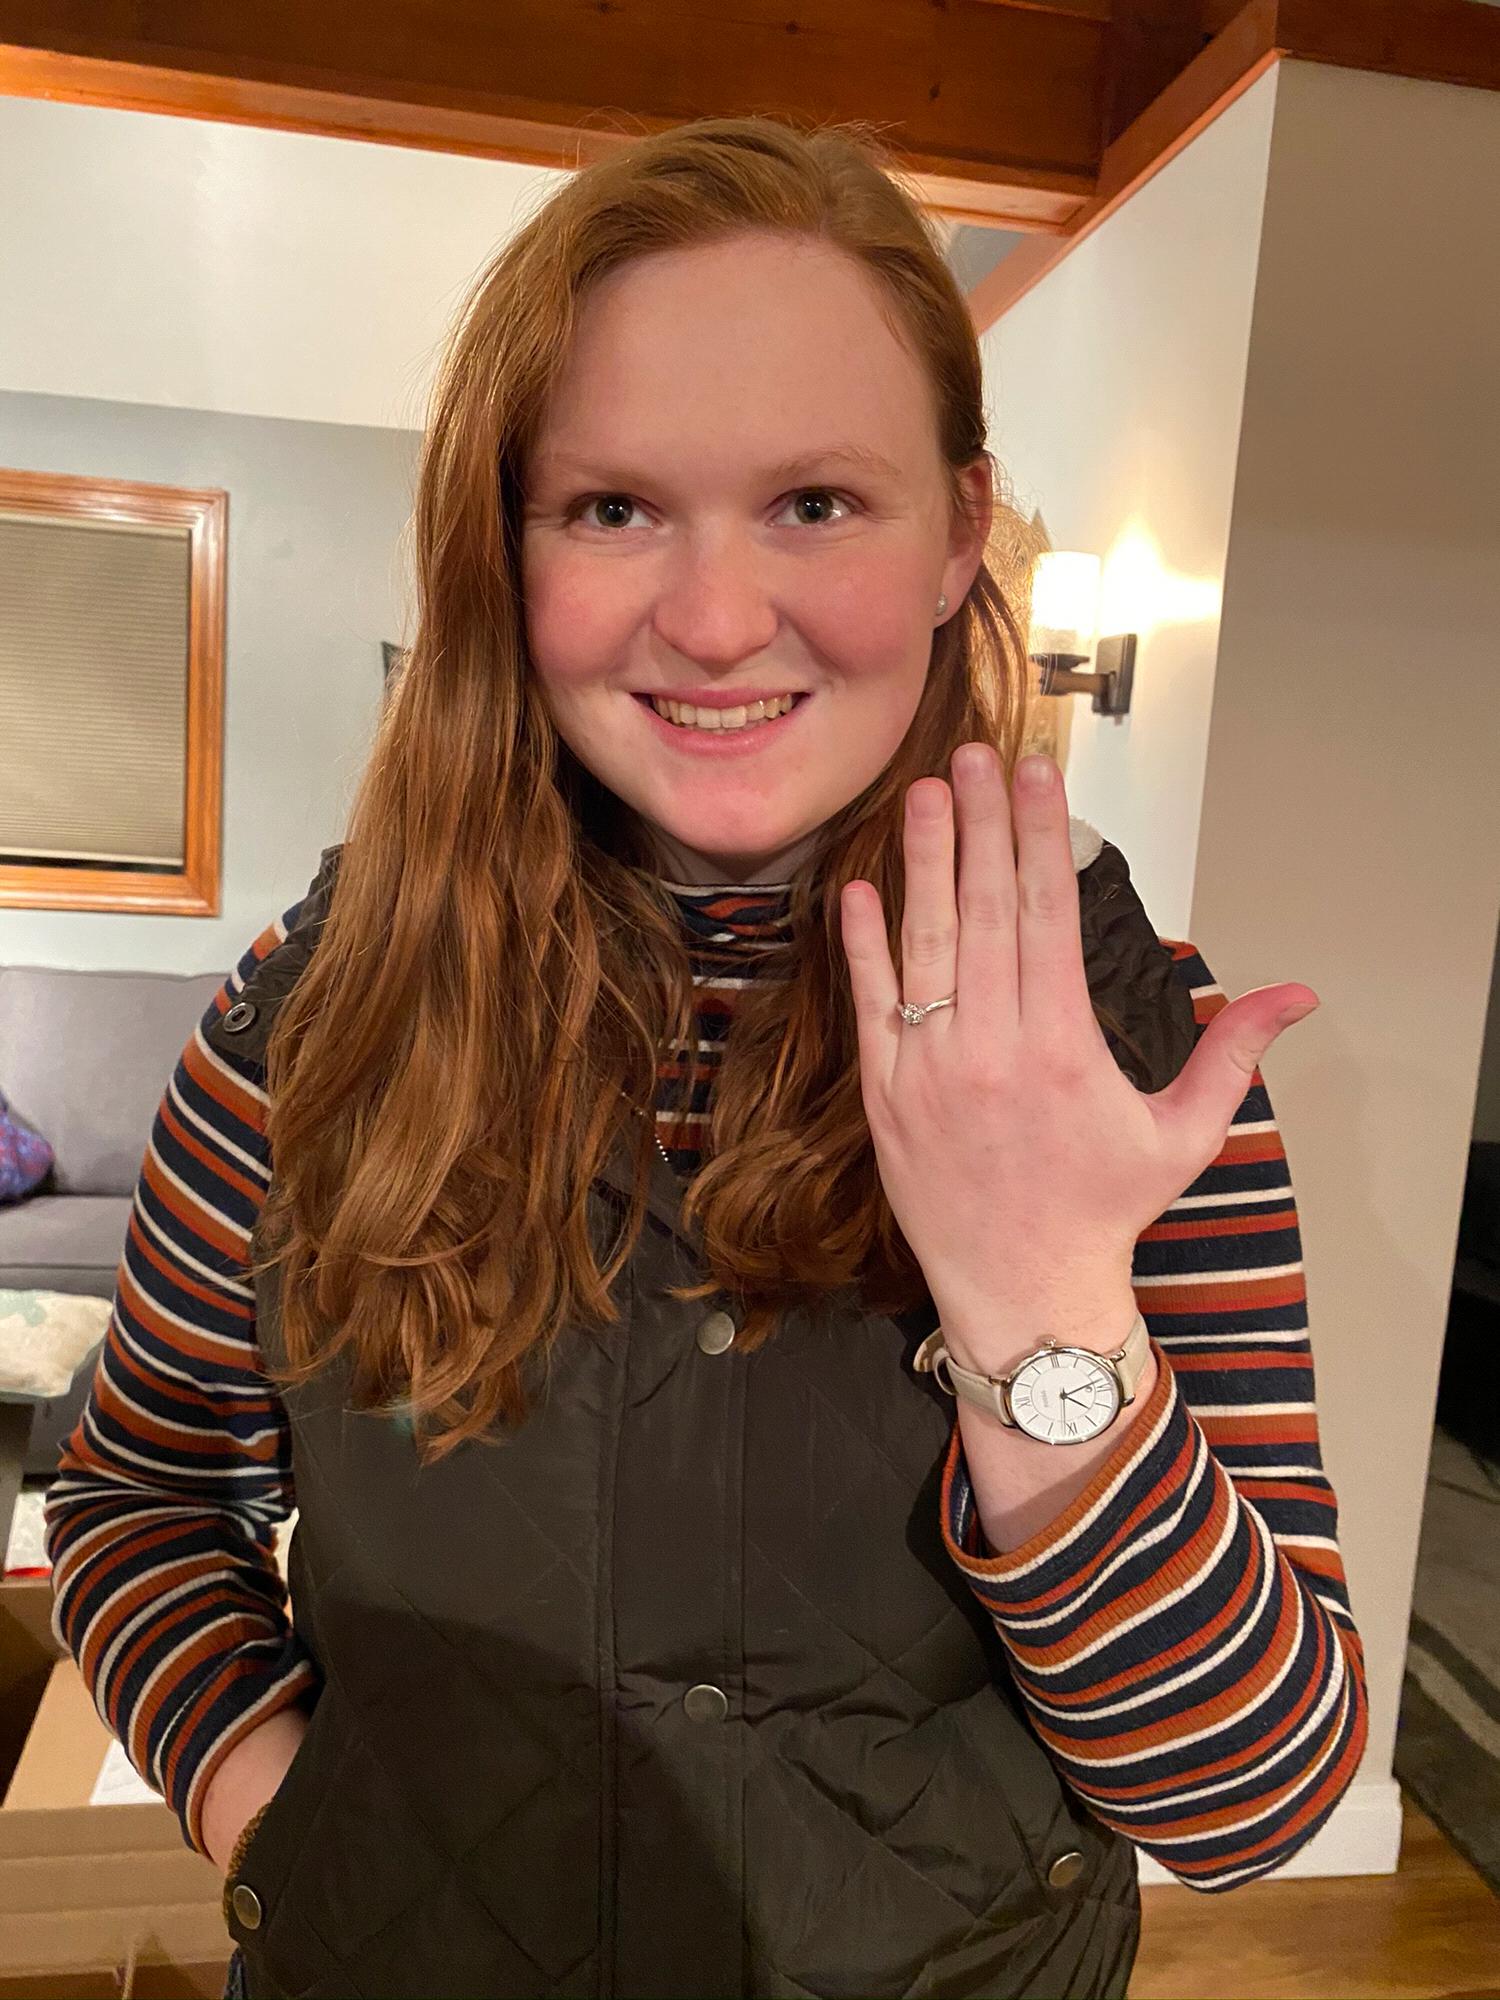 SHE SAID YES! 😍 March 2020